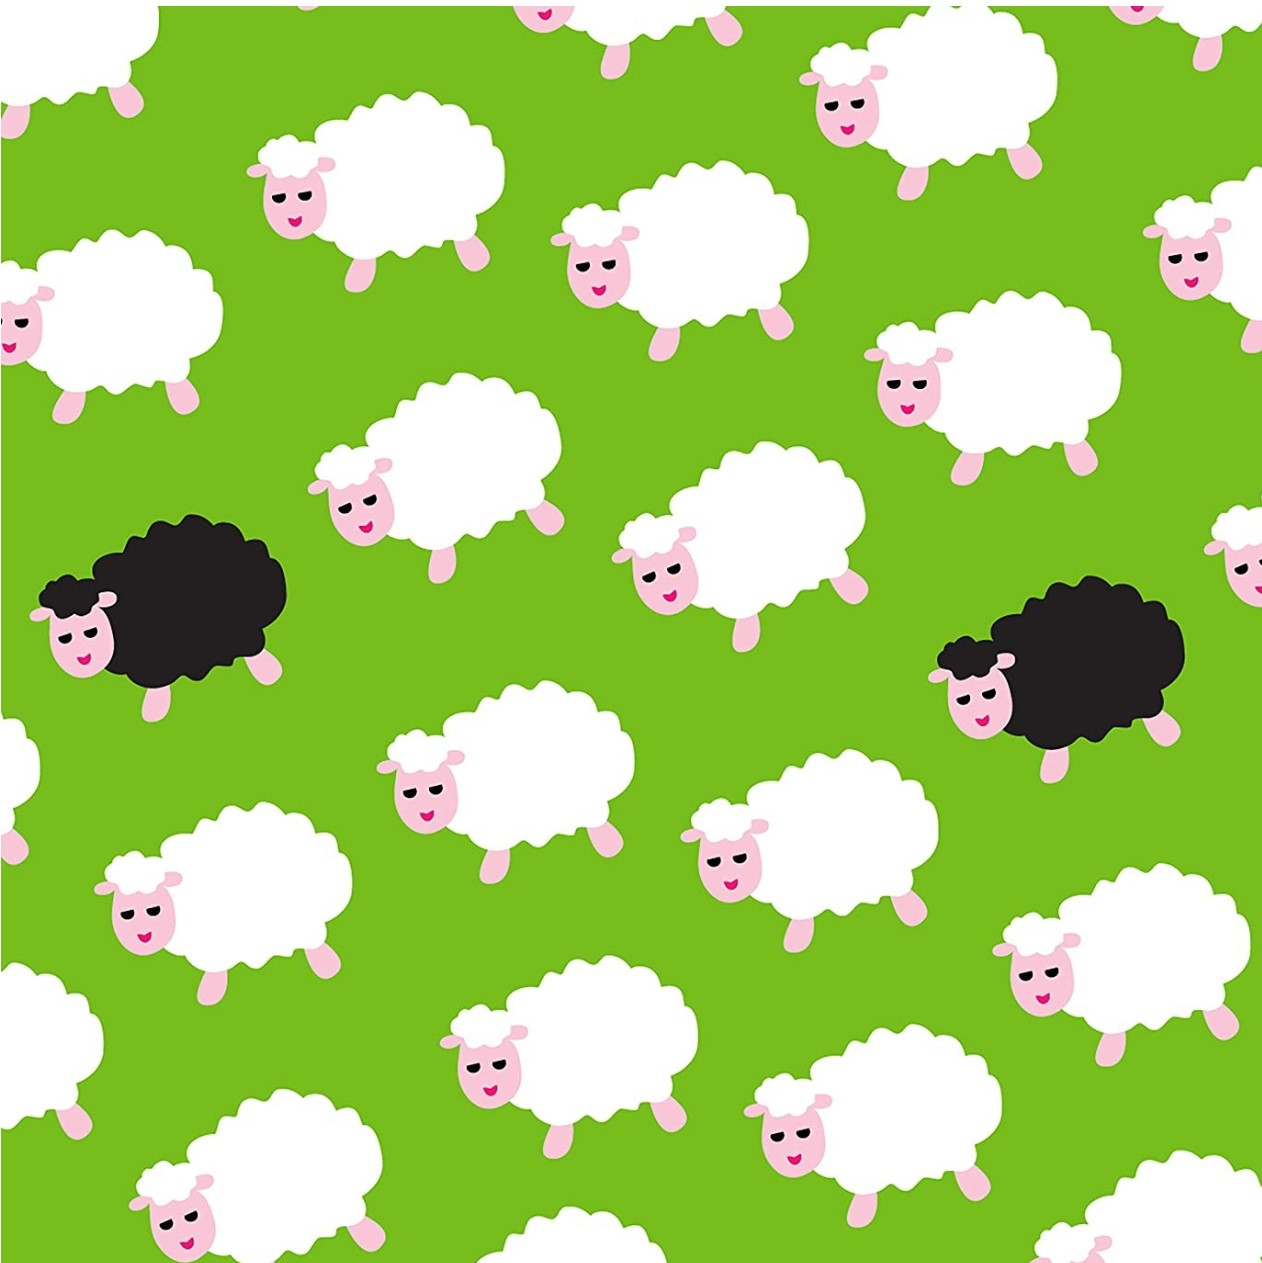 Black and White Sheep on a Green Background